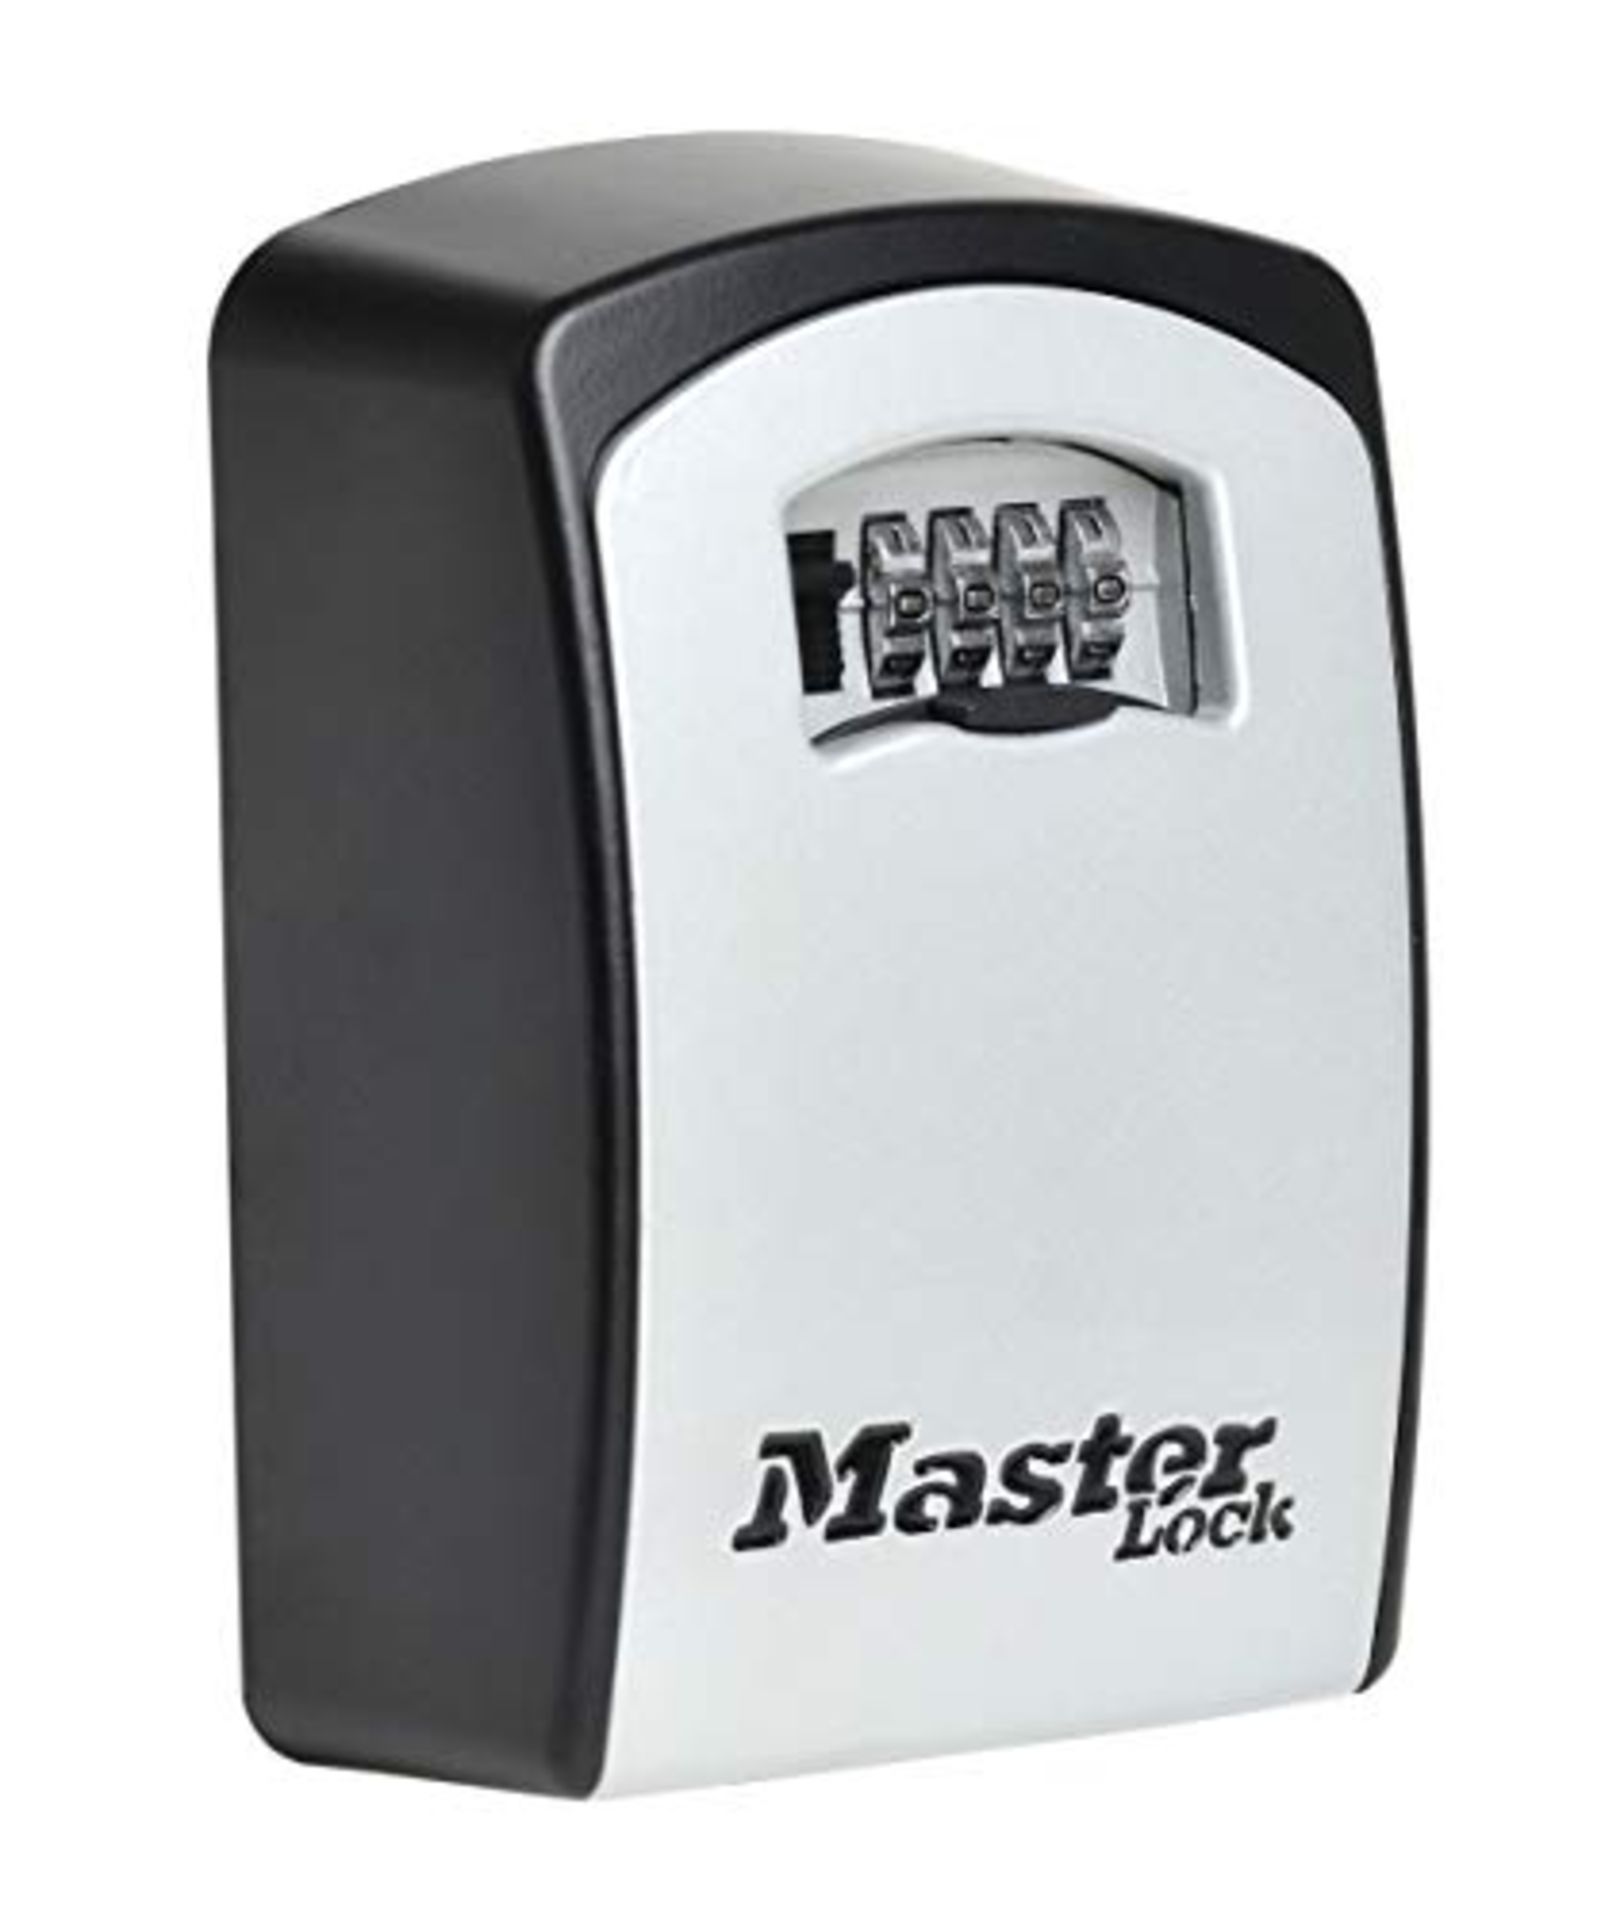 MASTER LOCK Extra Large Key Safe Wall Mounted, XL 106 x 146 x 53 mm, Outdoor, Mounting - Image 4 of 6